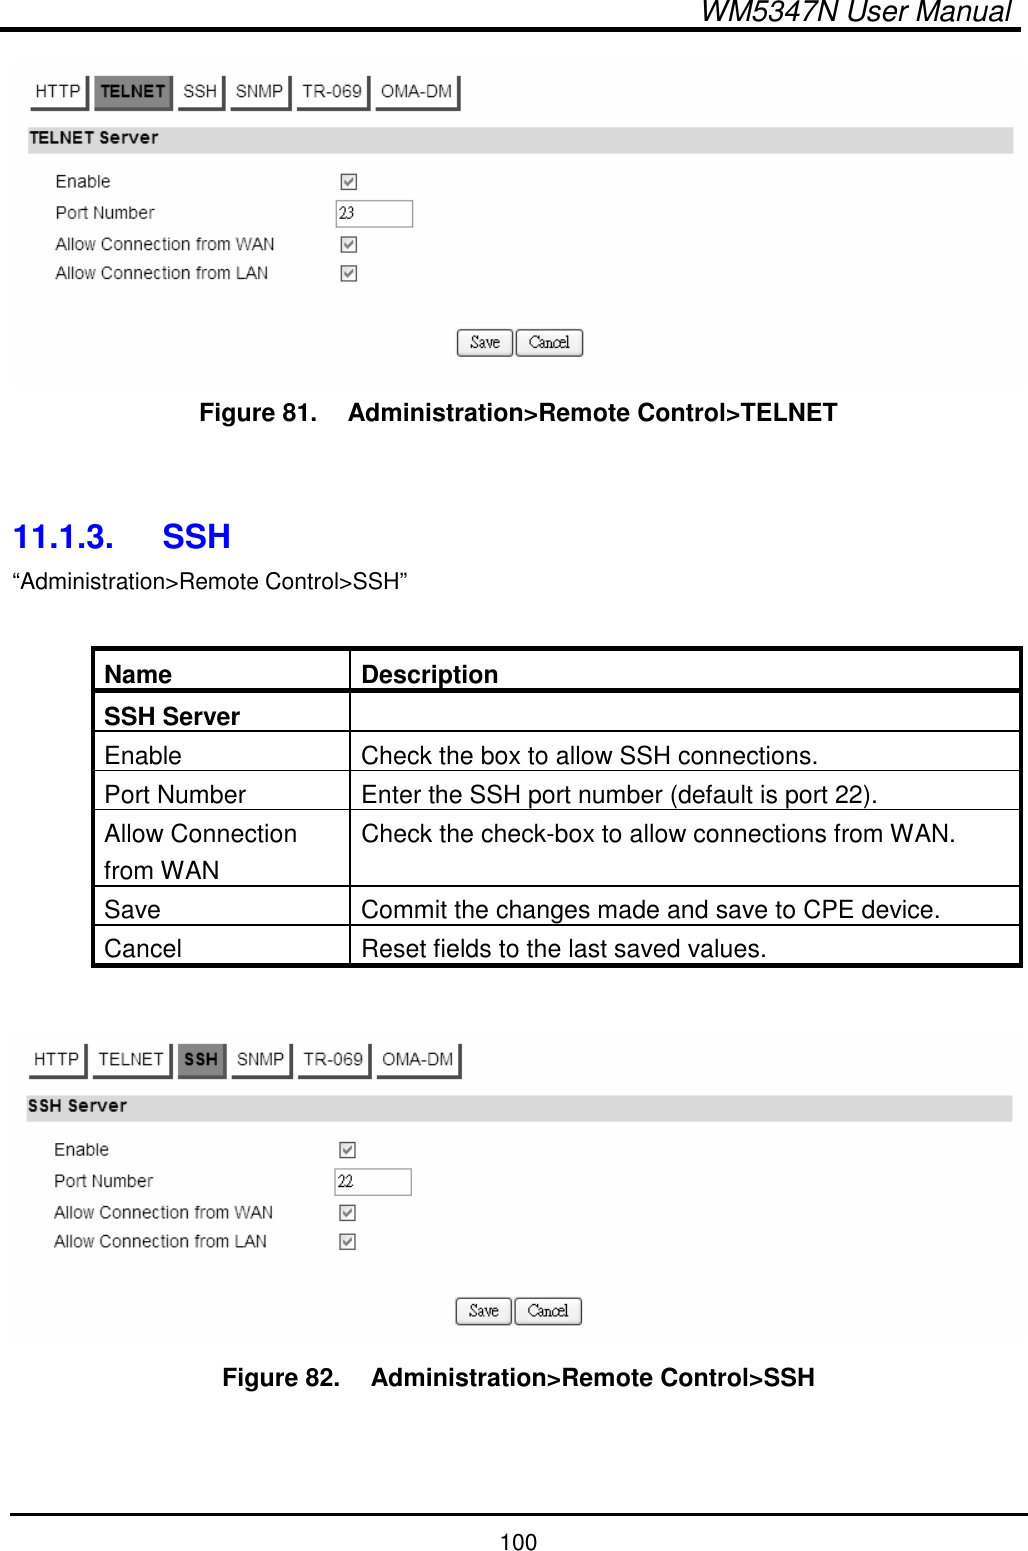  WM5347N User Manual  100  Figure 81.   Administration&gt;Remote Control&gt;TELNET   11.1.3.  SSH “Administration&gt;Remote Control&gt;SSH”  Name  Description SSH Server   Enable  Check the box to allow SSH connections. Port Number  Enter the SSH port number (default is port 22). Allow Connection from WAN Check the check-box to allow connections from WAN. Save  Commit the changes made and save to CPE device. Cancel  Reset fields to the last saved values.   Figure 82.   Administration&gt;Remote Control&gt;SSH   